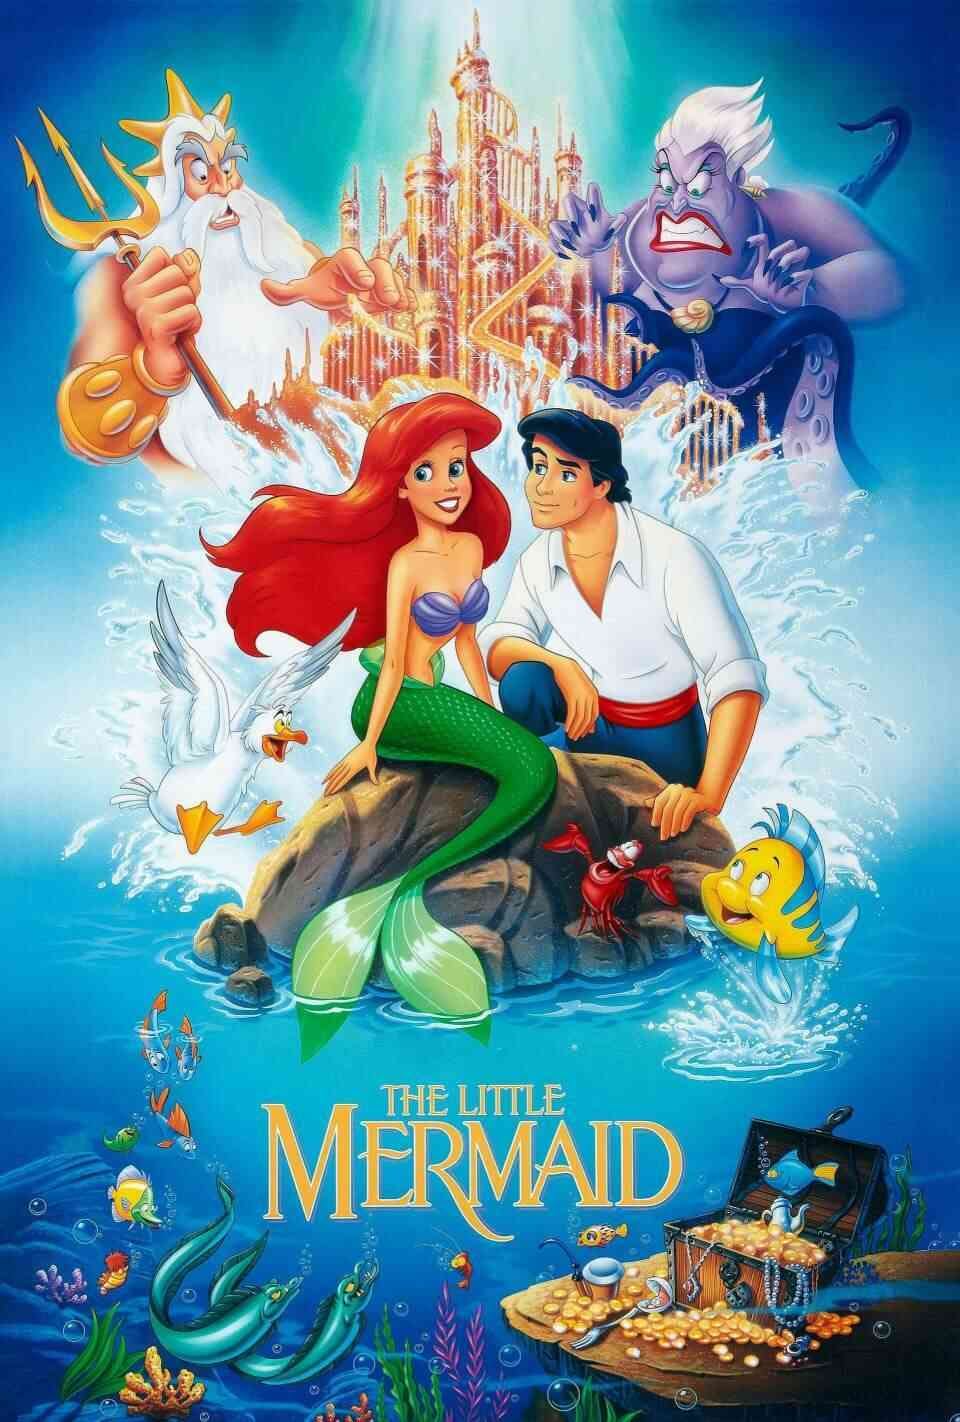 Read The Little Mermaid screenplay (poster)